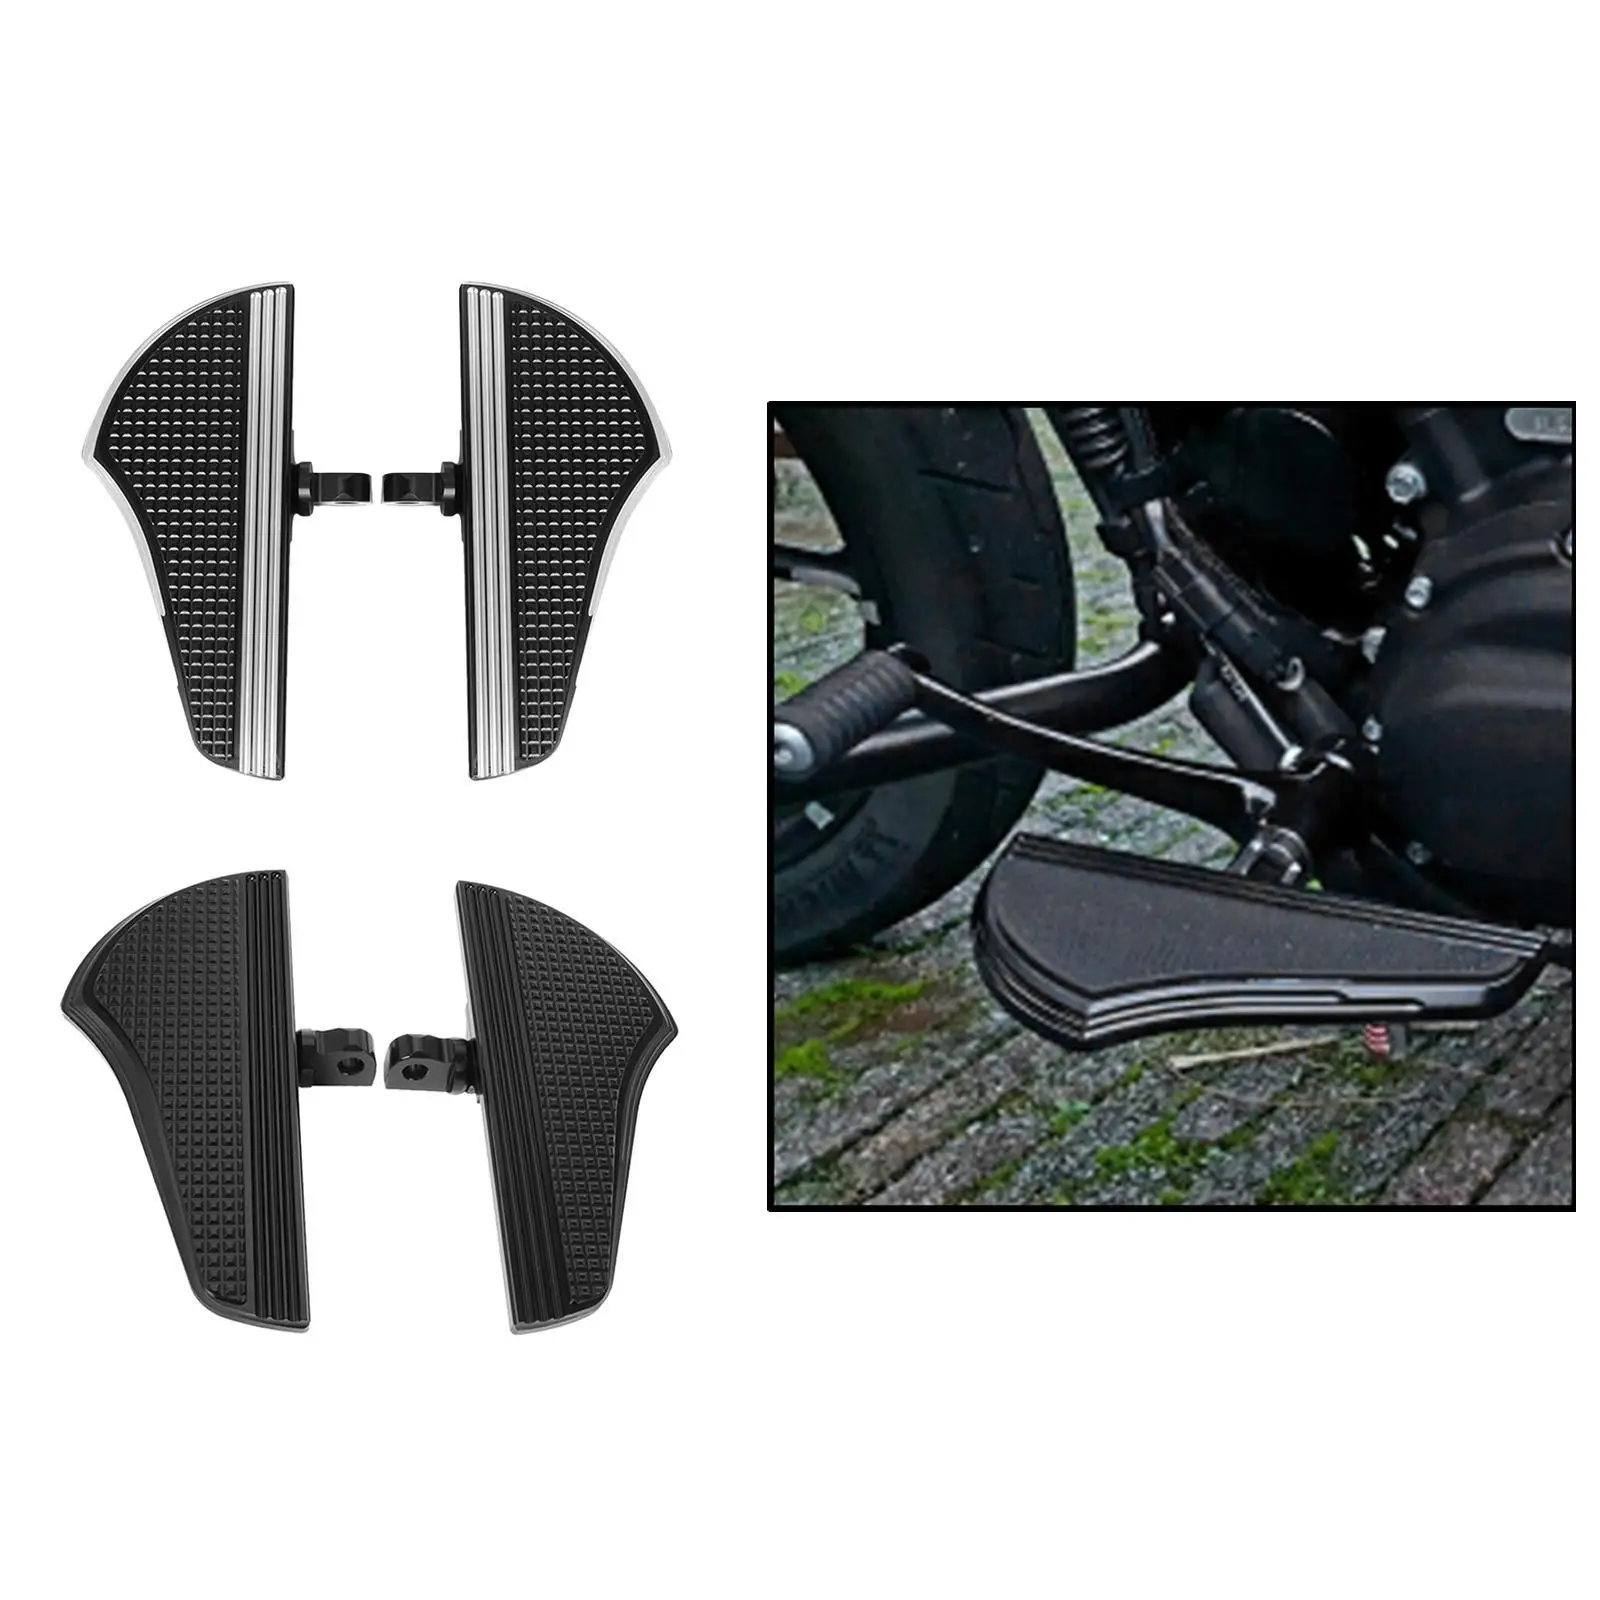 2 packs cnc motorcycle passenger rear foot pegs foot pedals supports accessories thumb200